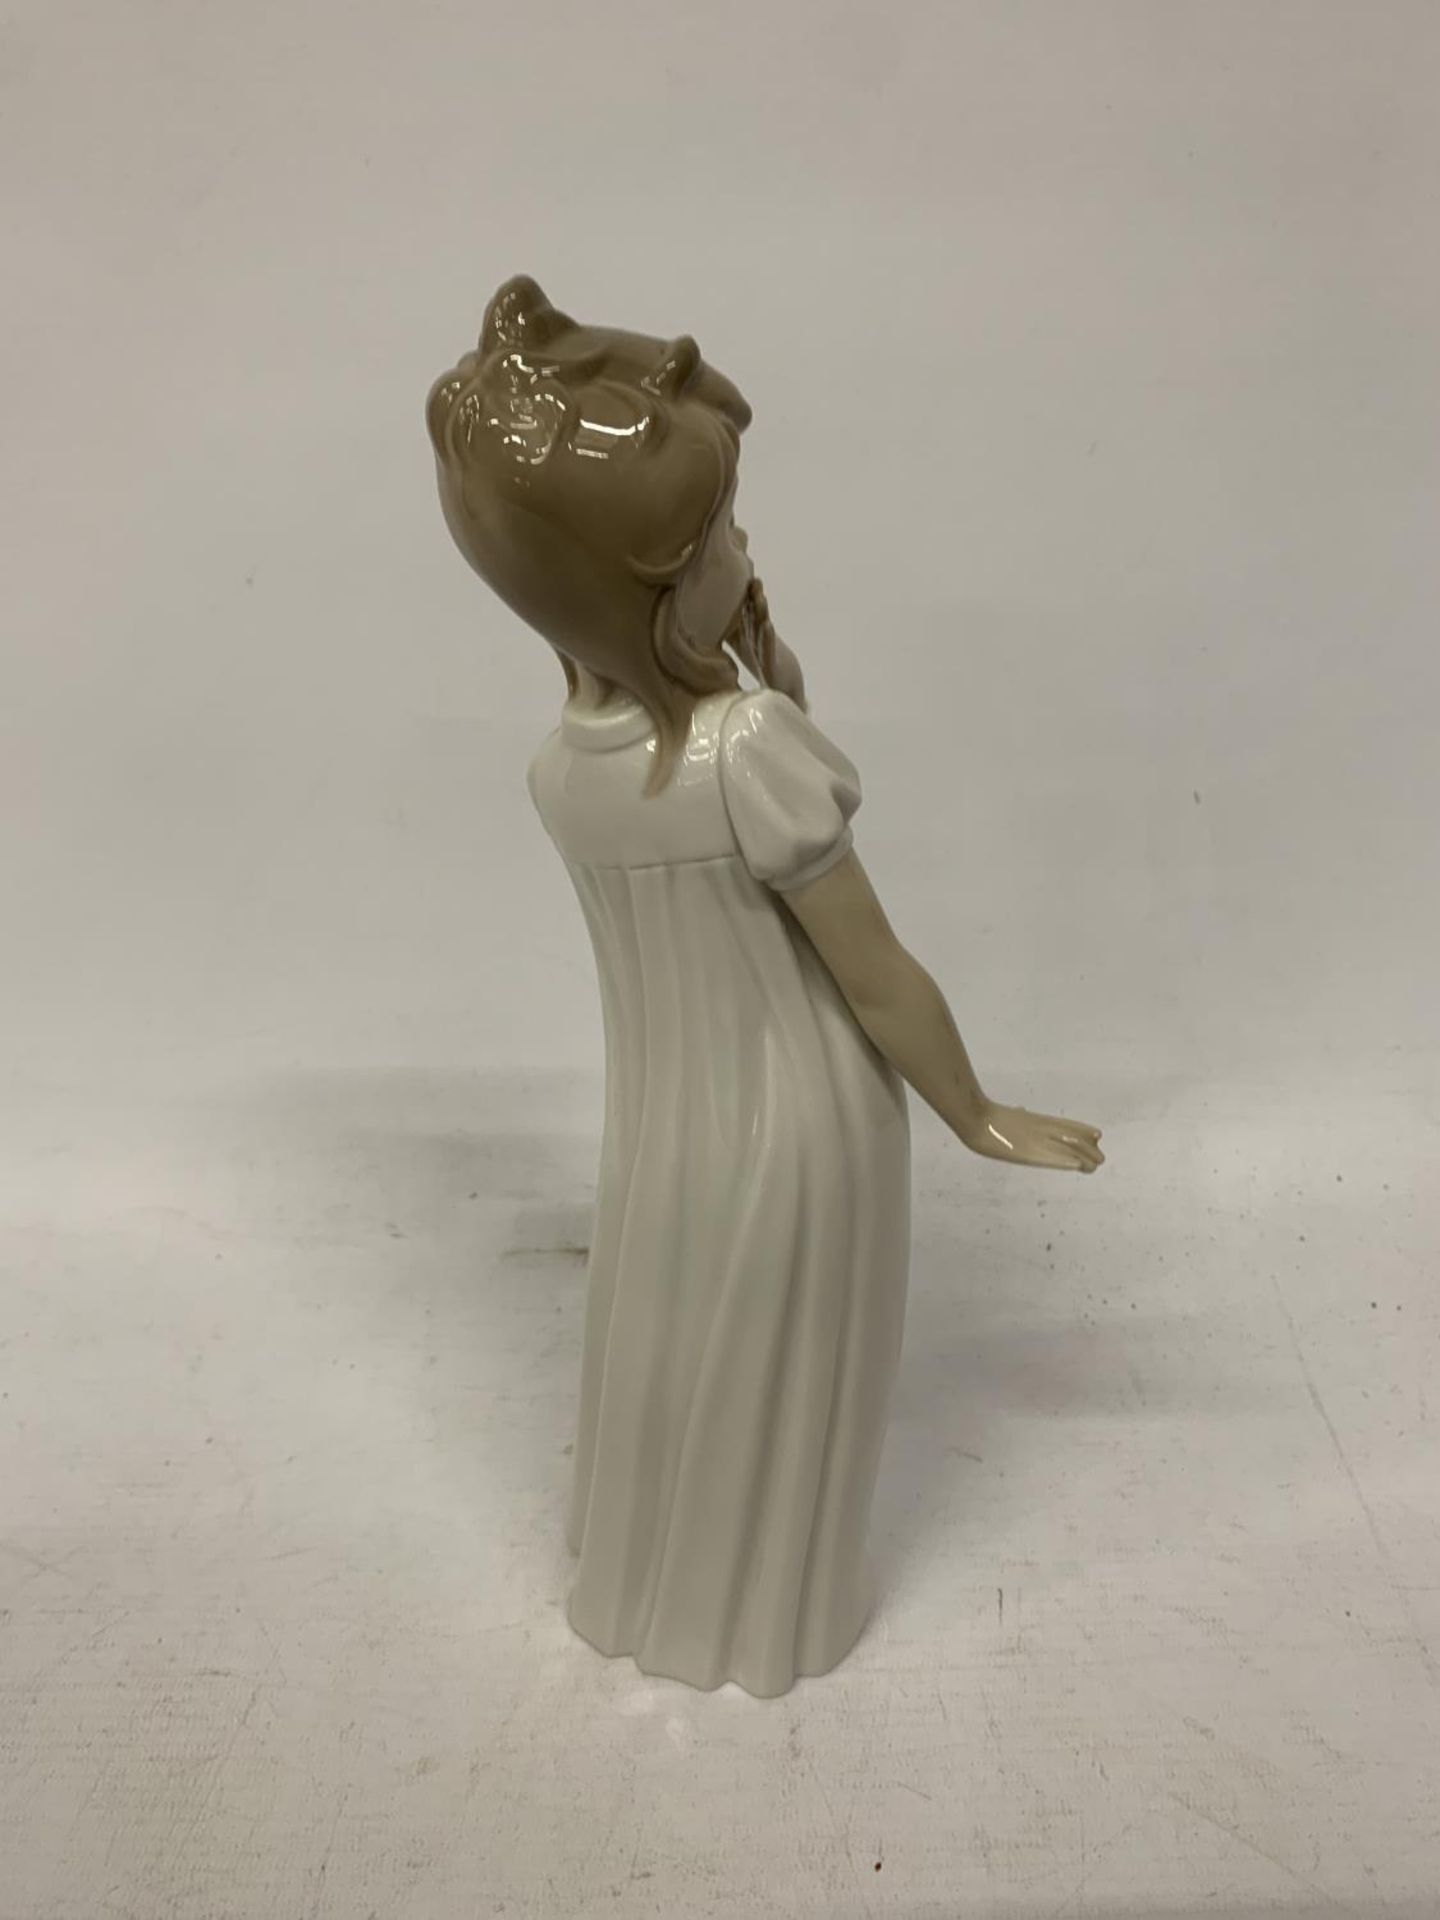 A LARGE NAO FIGURE OF A GIRL YAWNING - Image 2 of 3